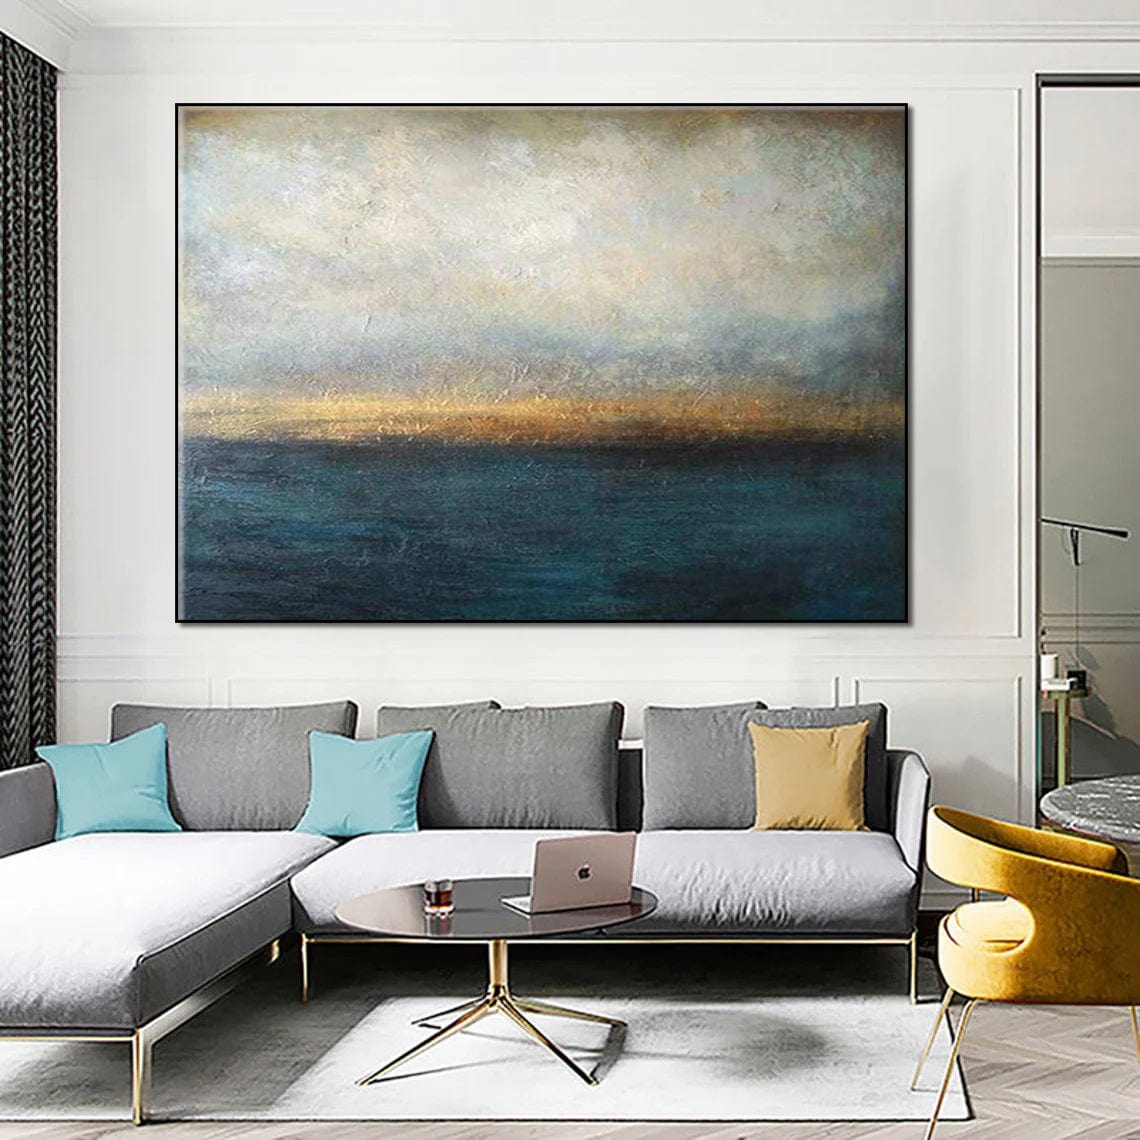 Where can I buy large abstract art? slider2-image-1